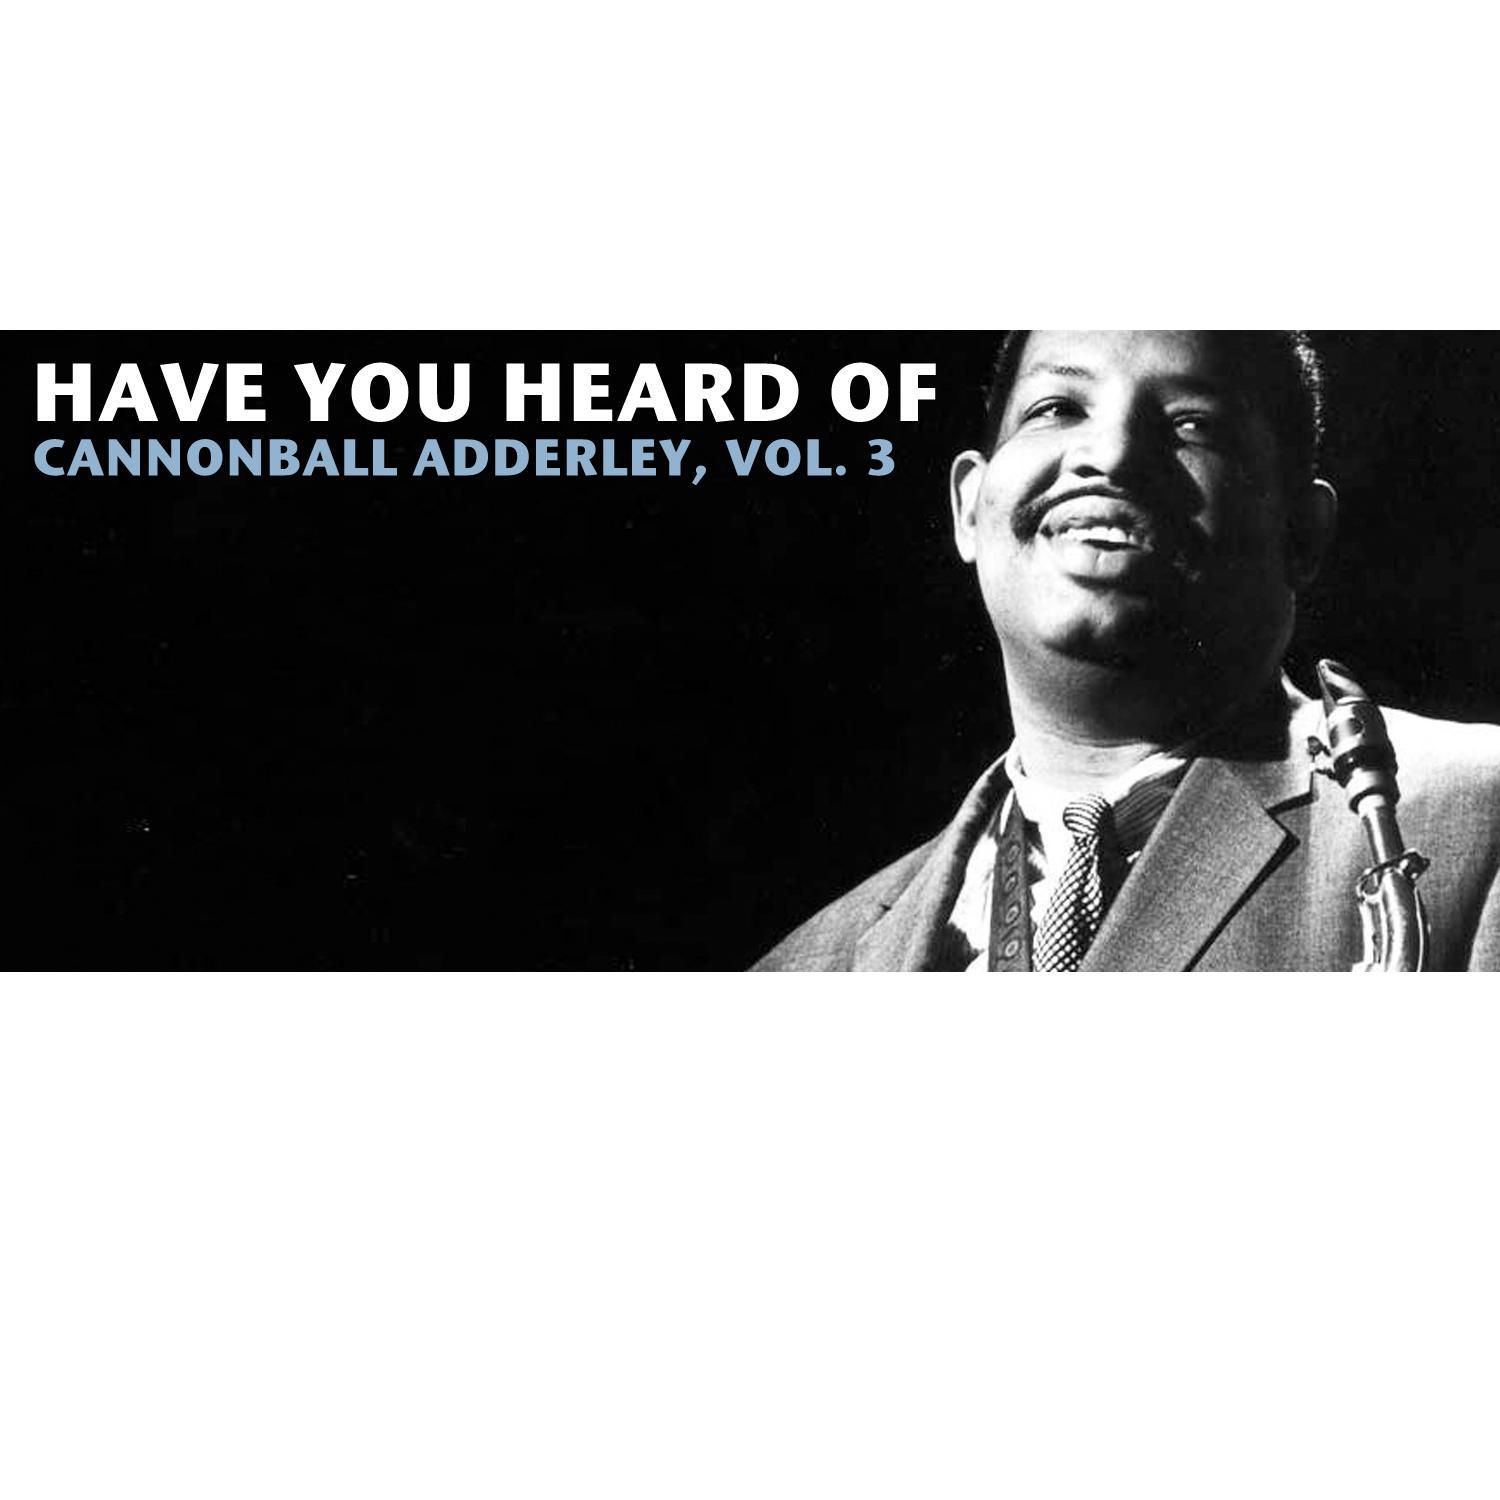 Have You Heard of Cannonball Adderley, Vol. 3